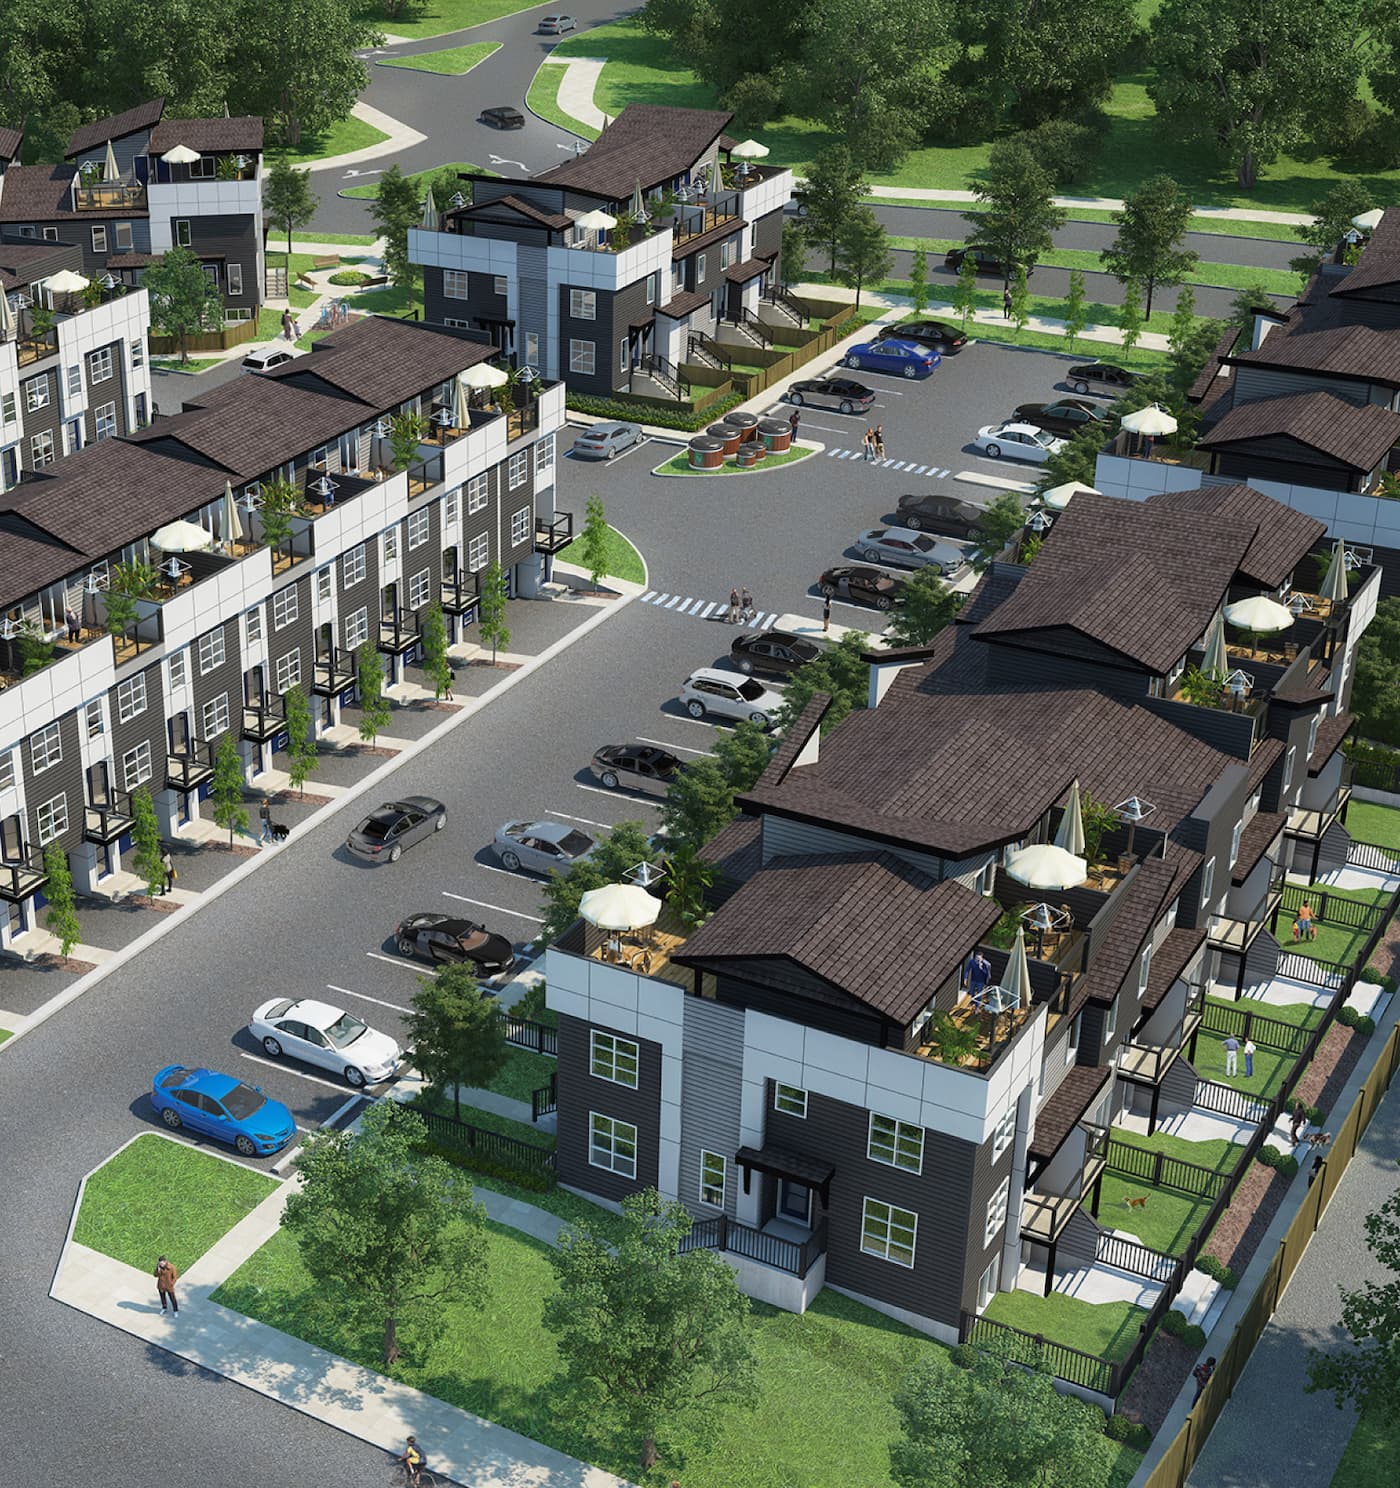 A 3D rendering of the Abrio community by Avalon Master Builders